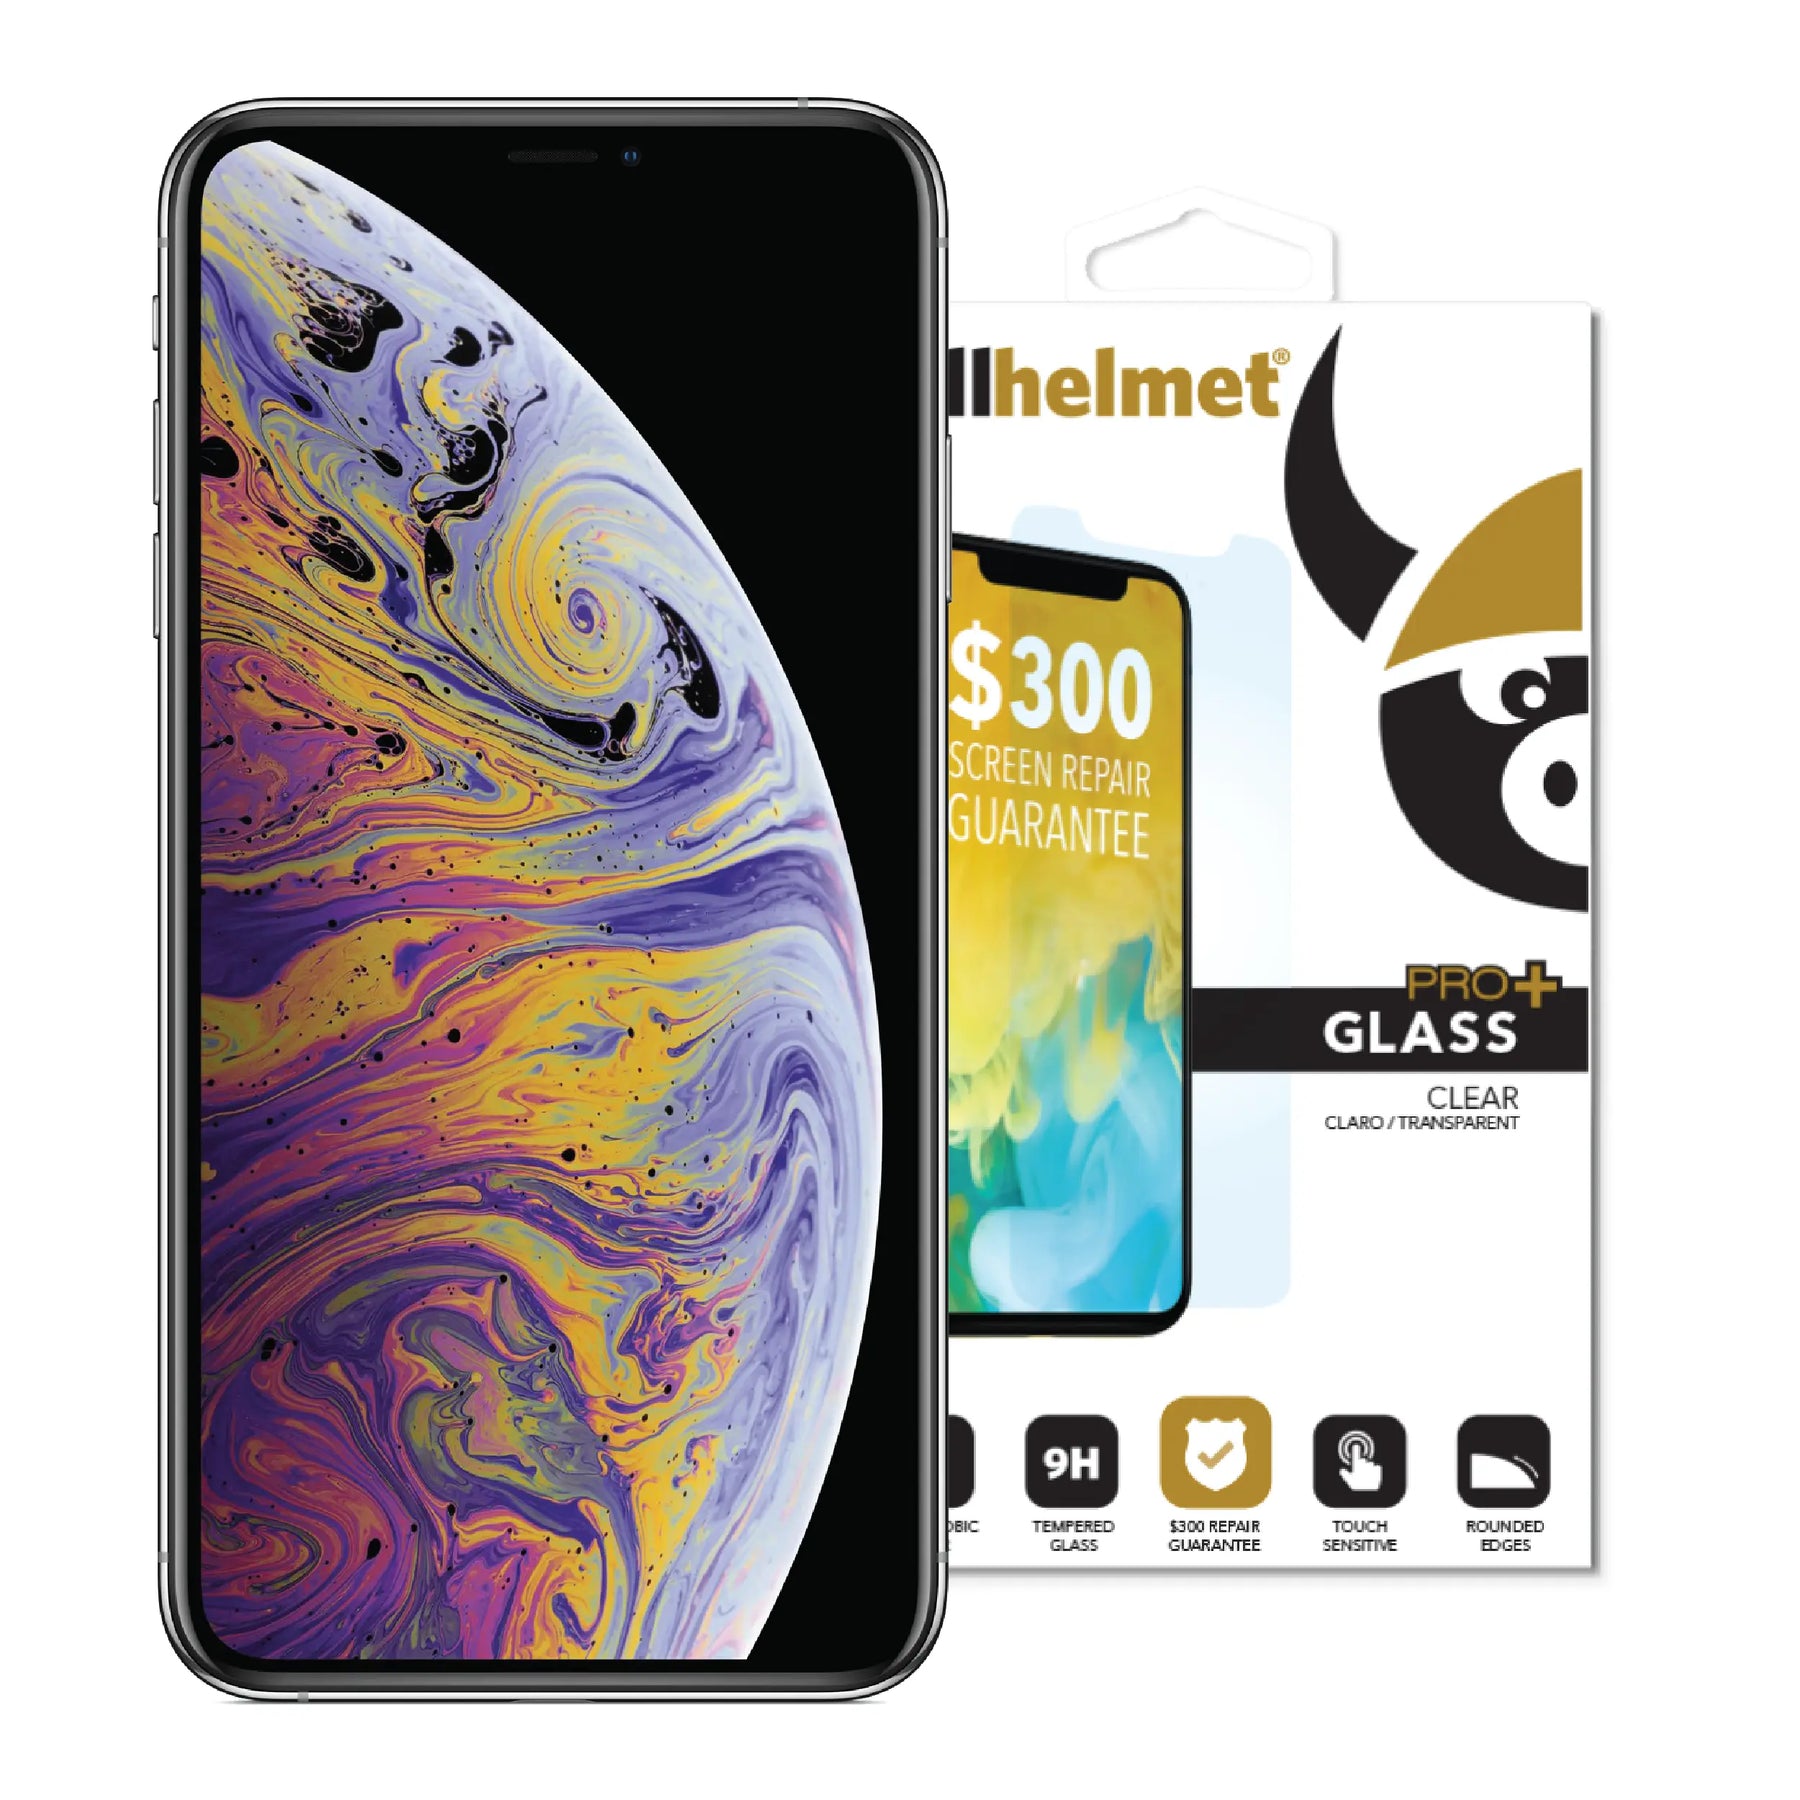 cellhelmet Tempered Glass Screen Protector for iPhone 11 Pro Max with Insurance